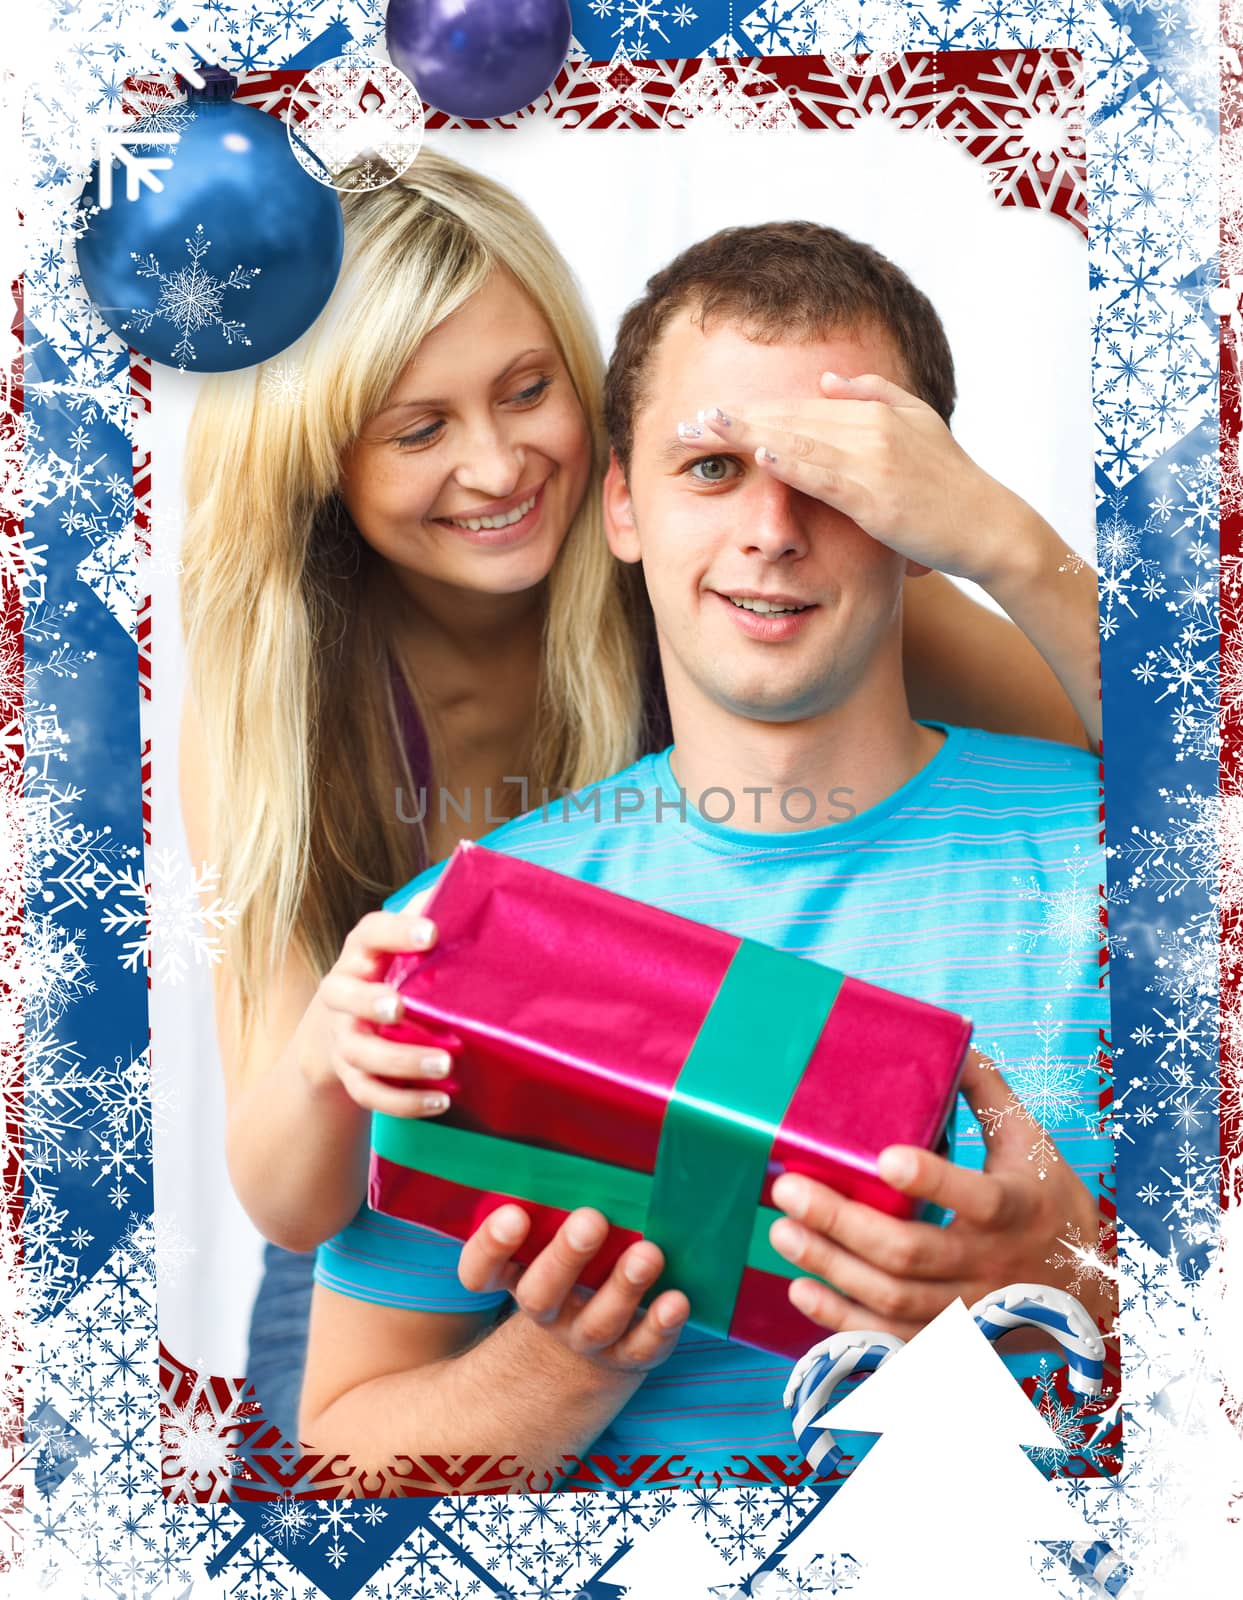 Woman giving a present to her boyfriend  against christmas themed frame